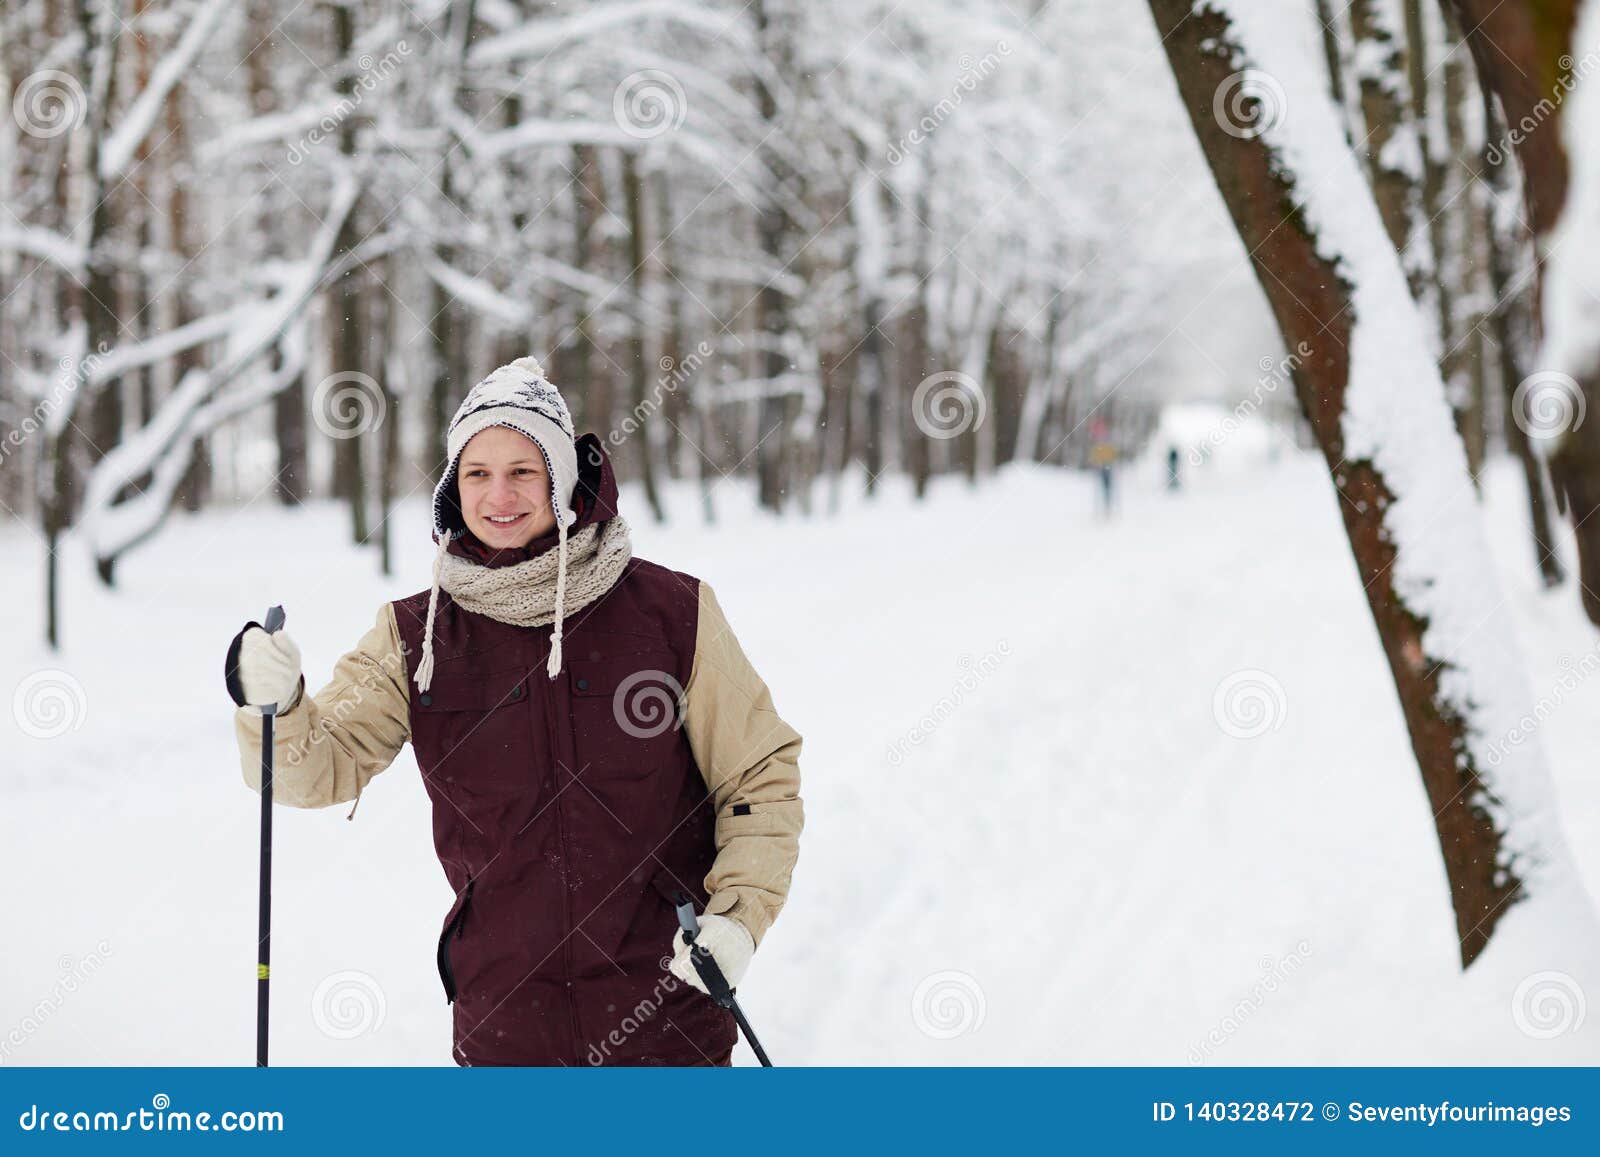 Sportive Man Skiing in Forest Stock Photo - Image of carefree, outdoors ...